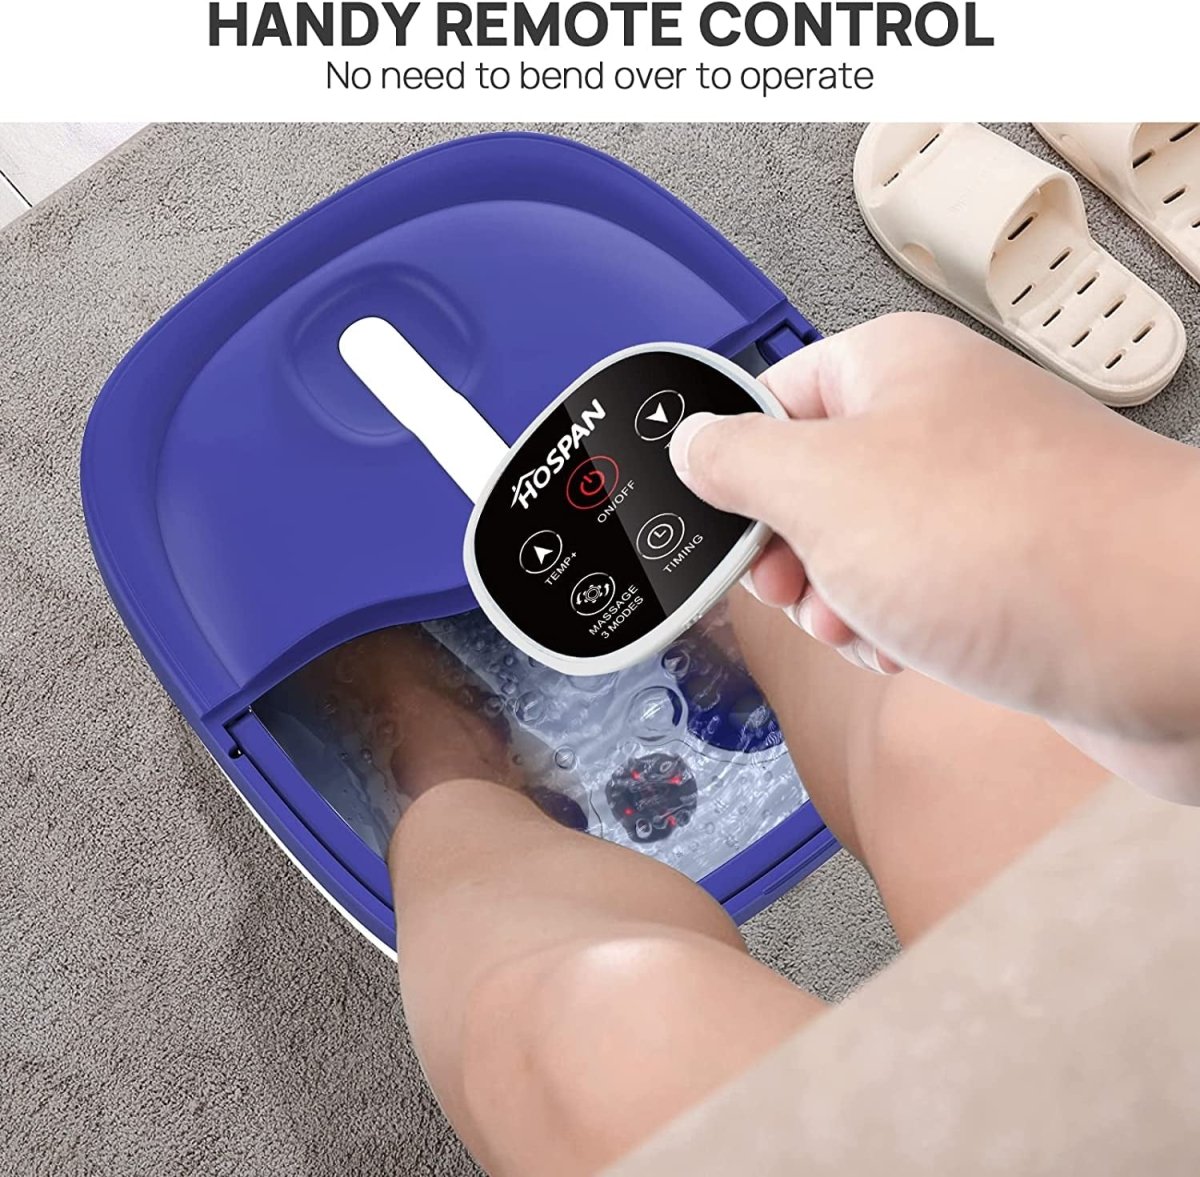 Collapsible Foot Bath with Heat, Bubble, Remote, and 24 Motorized Massage Balls - Shiny Nails